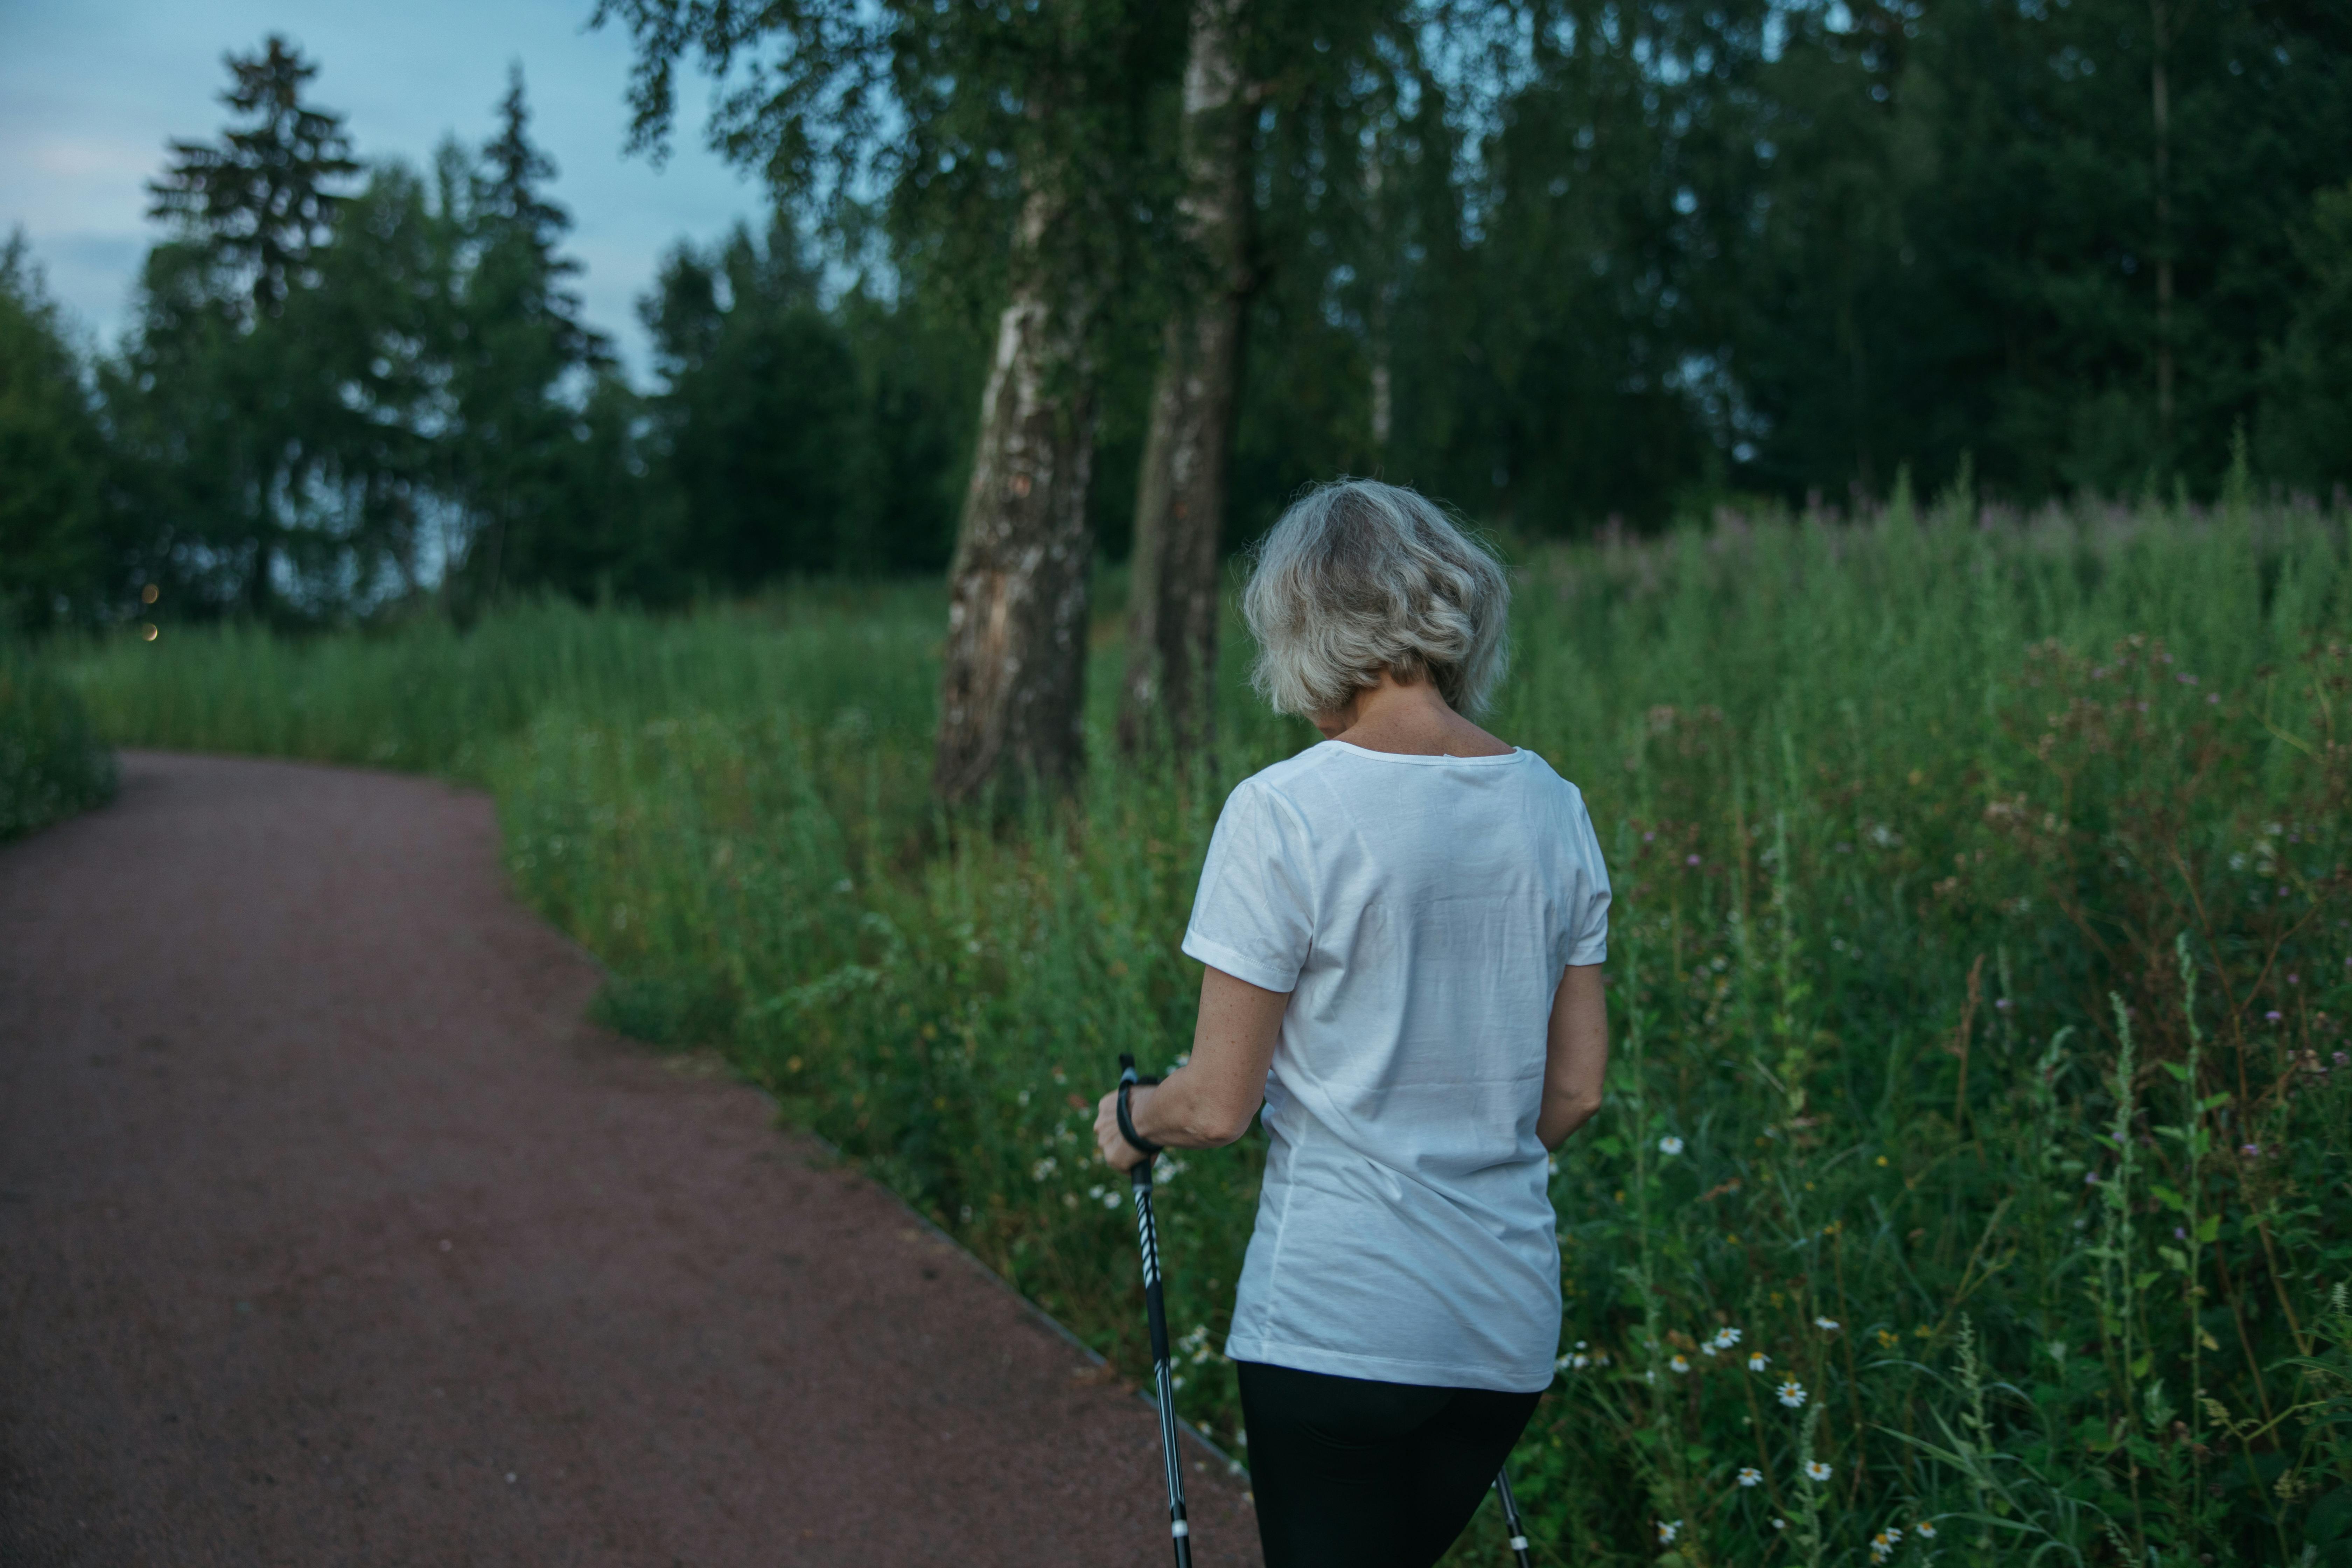  Walking Your Way to Health: A Simple, Effective Fitness Strategy